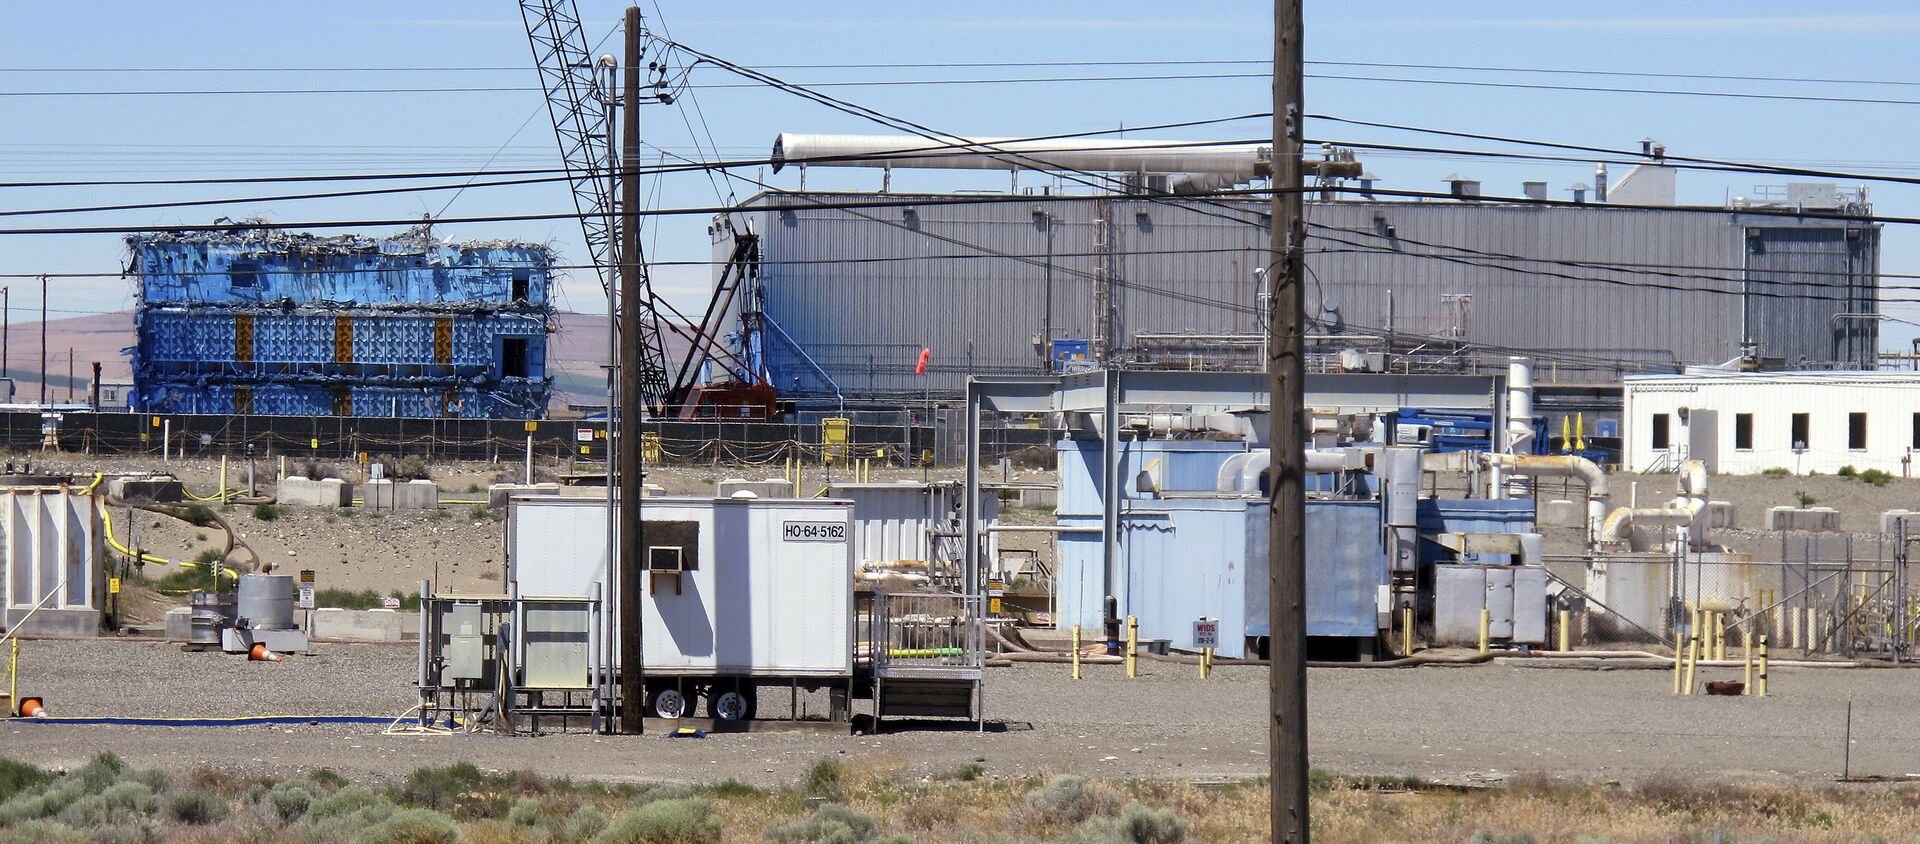 This May 13, 2017, photo shows a portion of the Plutonium Finishing Plant on the Hanford Nuclear Reservation near Richland, Wash. Officials say dozens of workers demolishing the 1940s-era plutonium processing plant there have ingested or inhaled radioactive particles in the past year, prompting a halt to the demolition of the plant until a safe plan can be developed. - Sputnik International, 1920, 14.06.2018